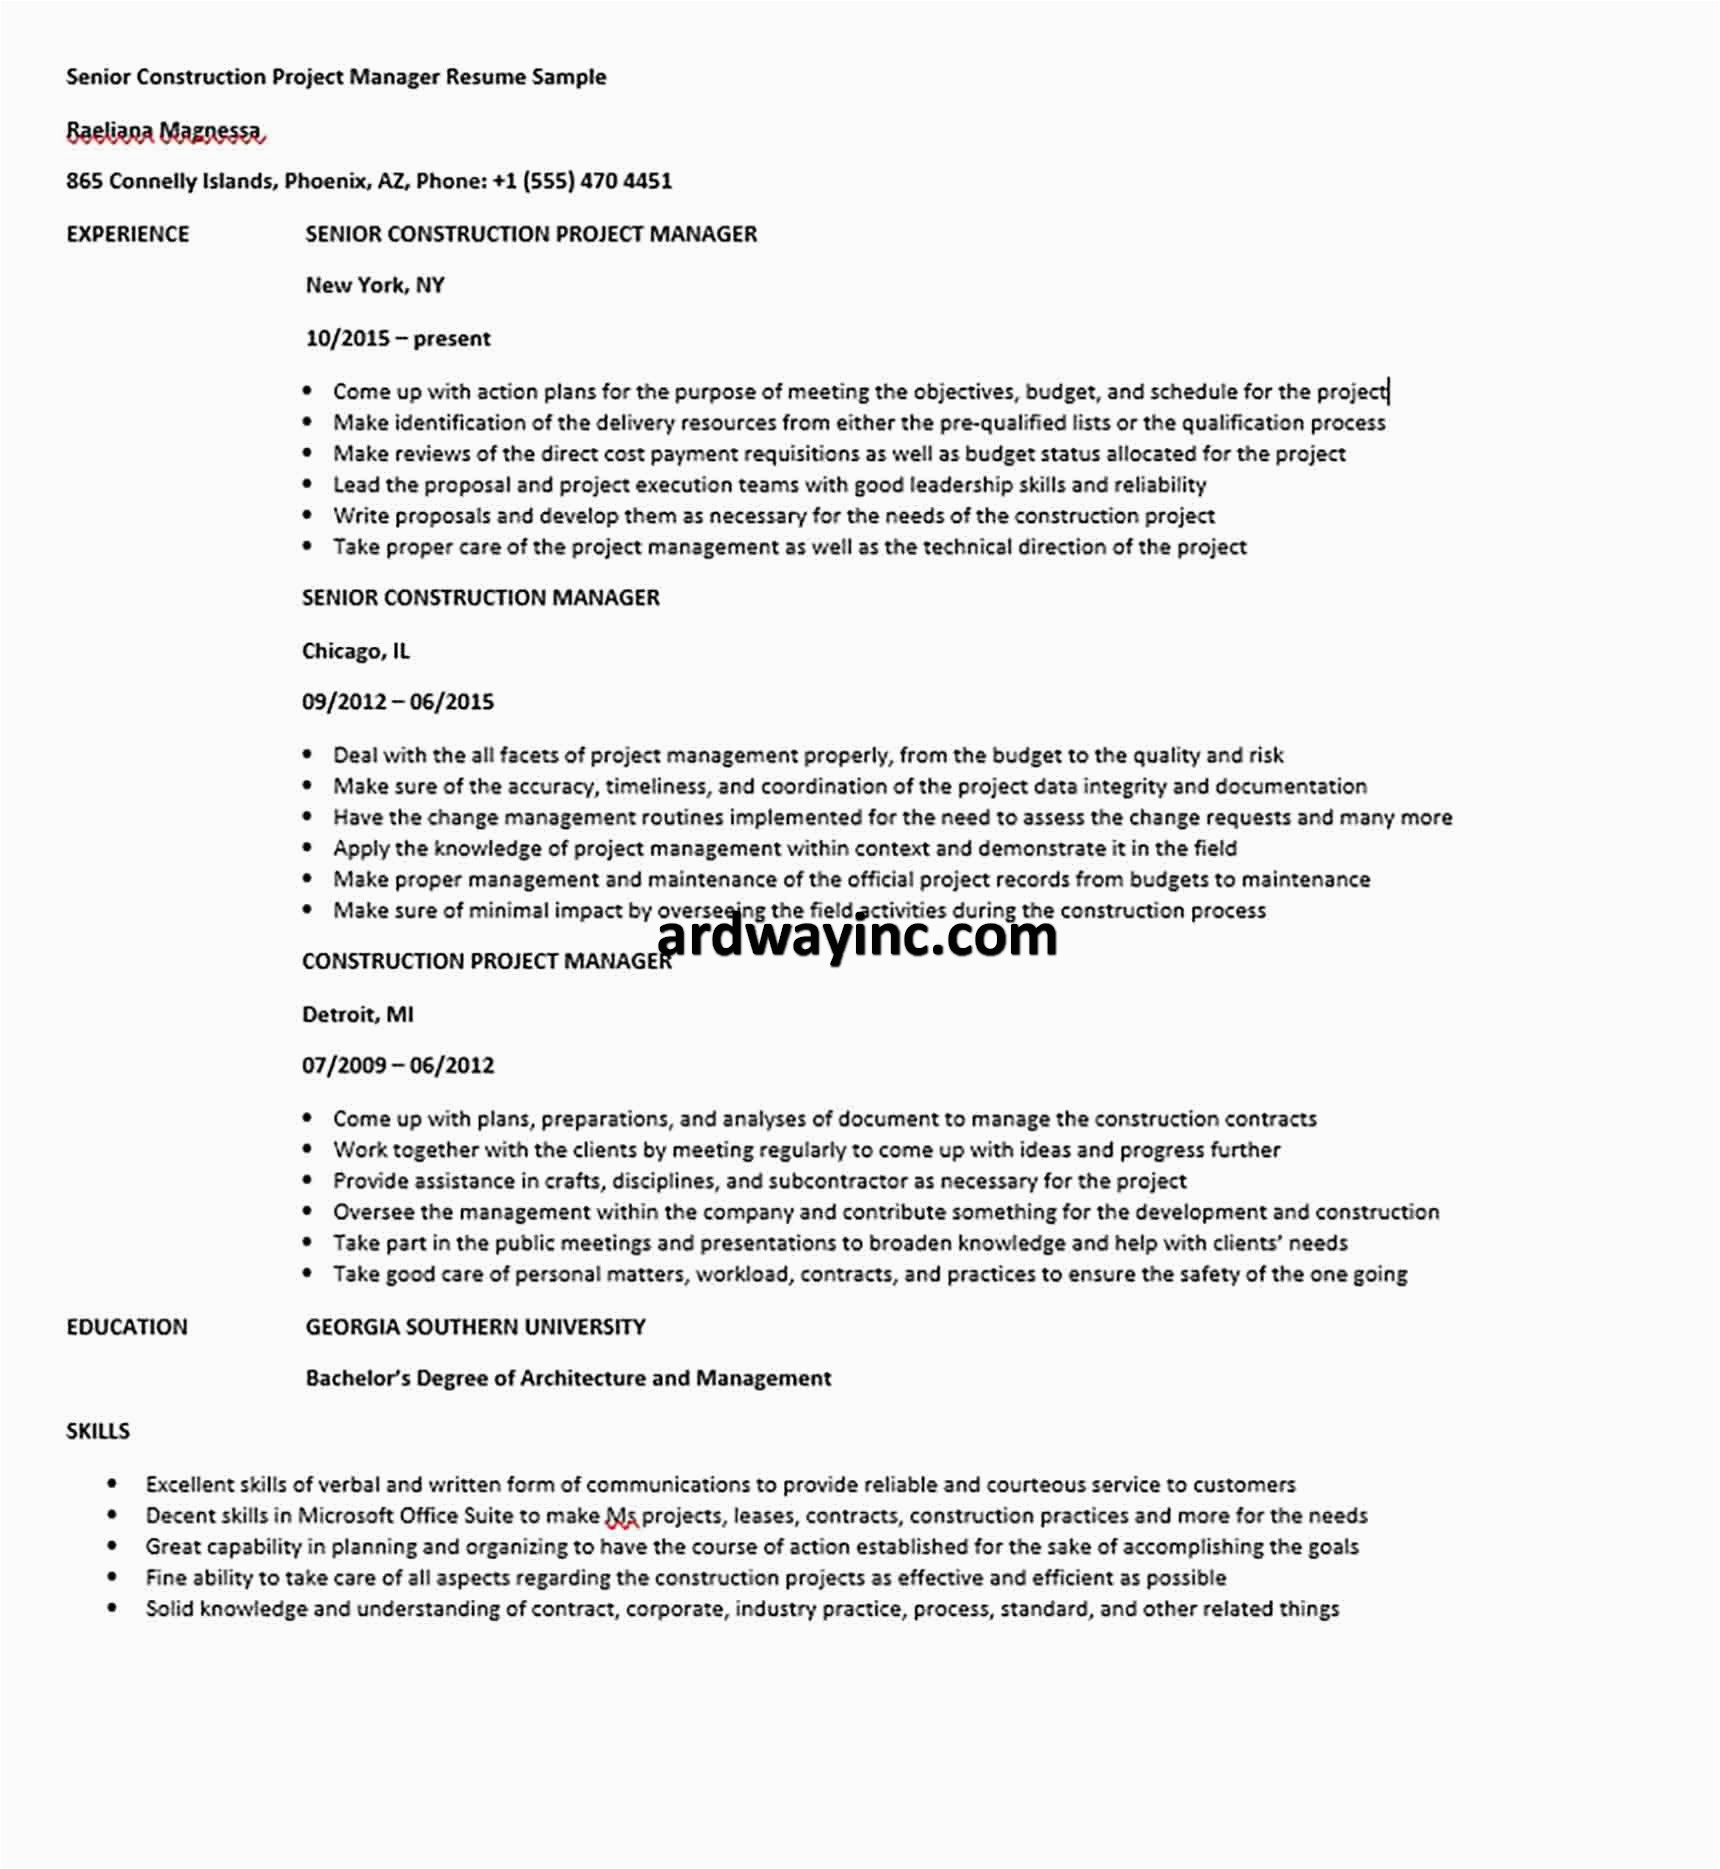 Sample Resume Senior Project Manager Construction Senior Construction Project Manager Resume Sample